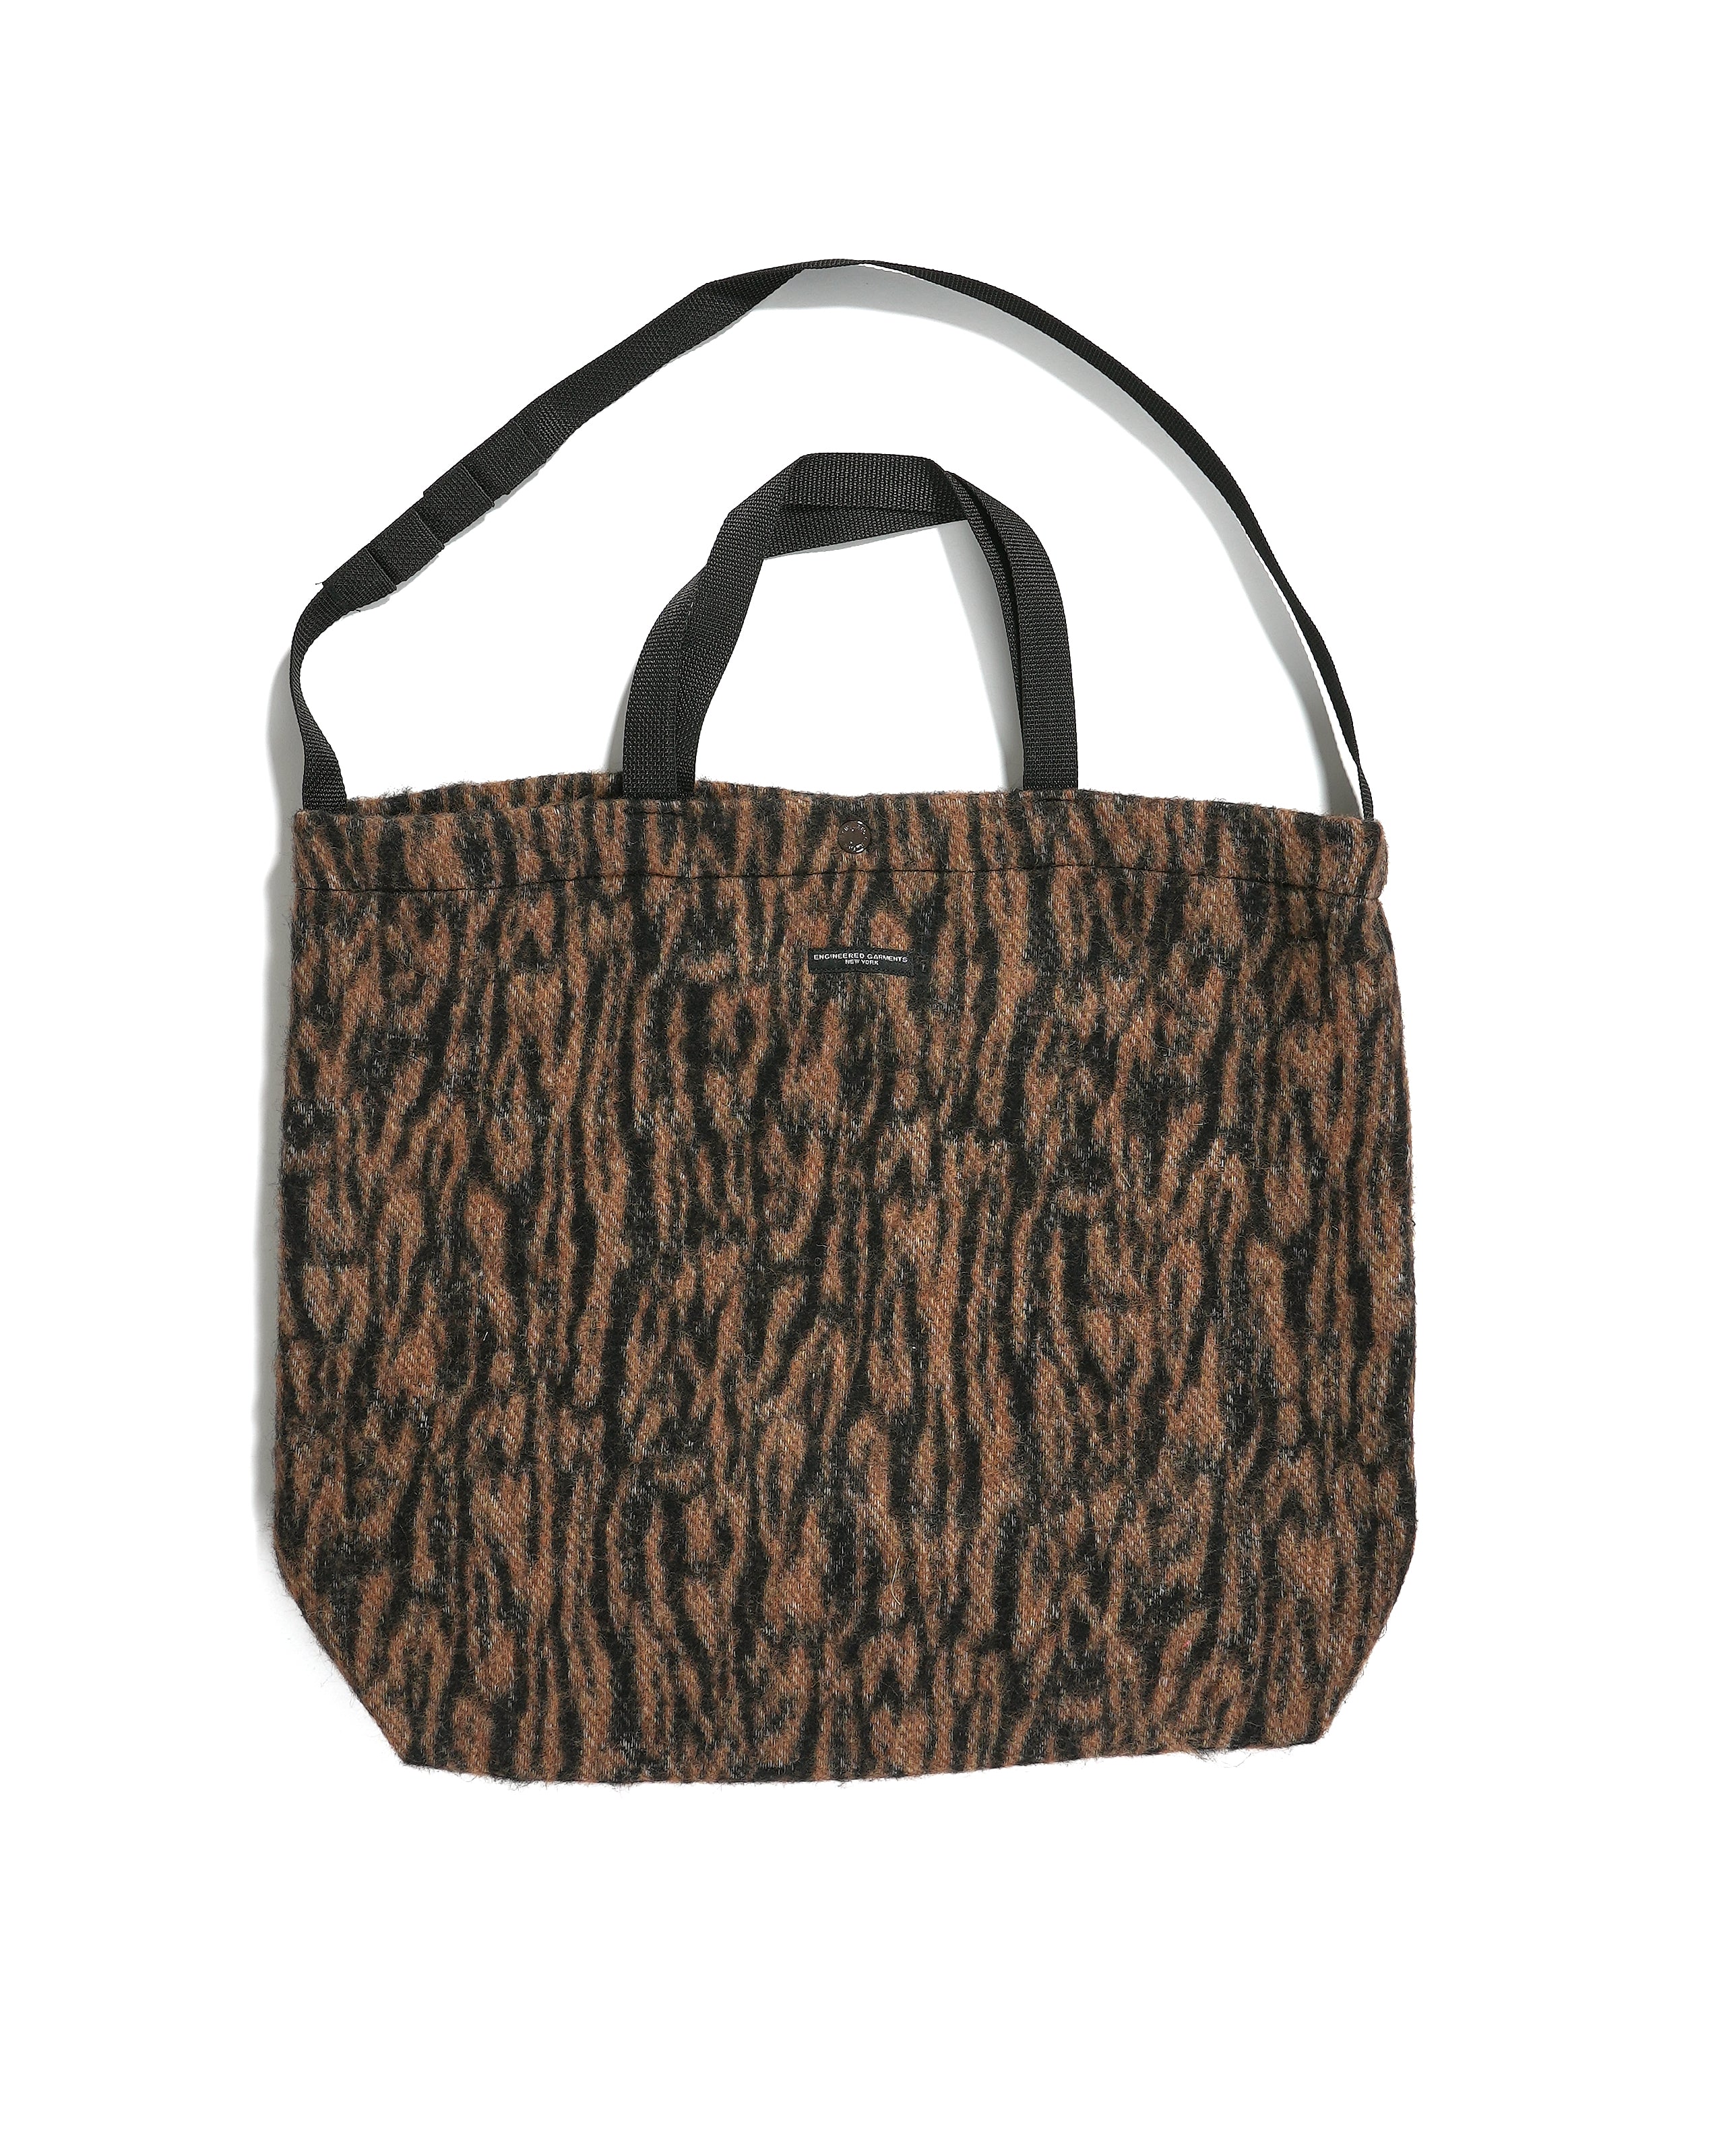 Carry All Tote - Brown Acrylic Poly Bark Jacquard